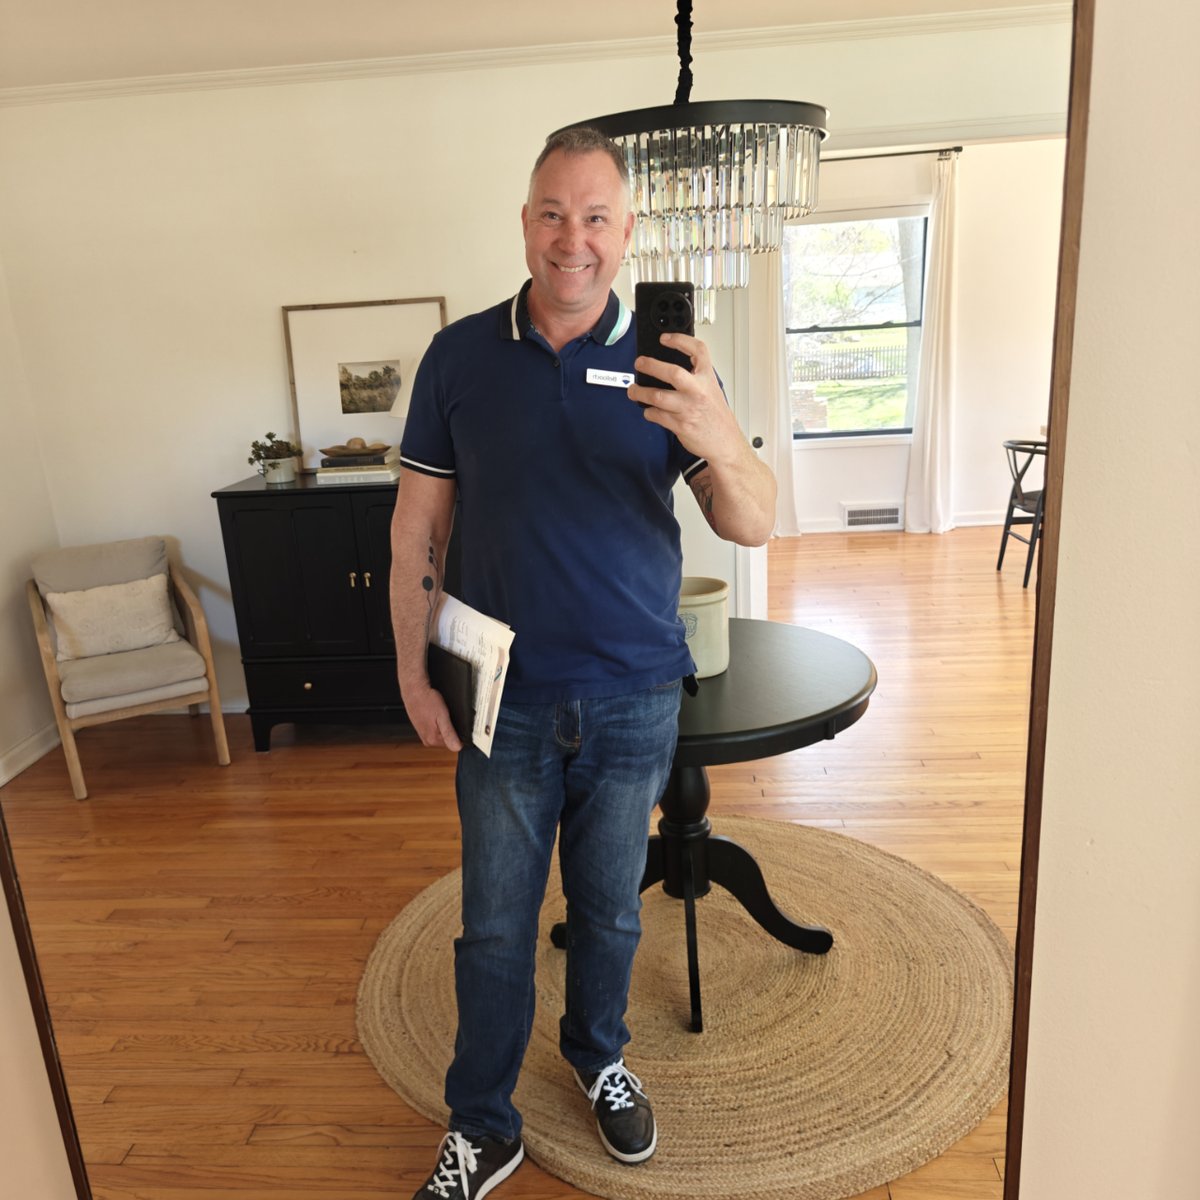 Took a mirror selfie earlier before diving into real estate things! 🏡💼 Do you need a realtor? Send me a message now! Visit bellooch.com for more!
#RealEstateLife 
#MirrorSelfie 
#ReadyToWork 
#DreamHomeHunter 
#belloochrealtor 
#ConfidenceIsKey